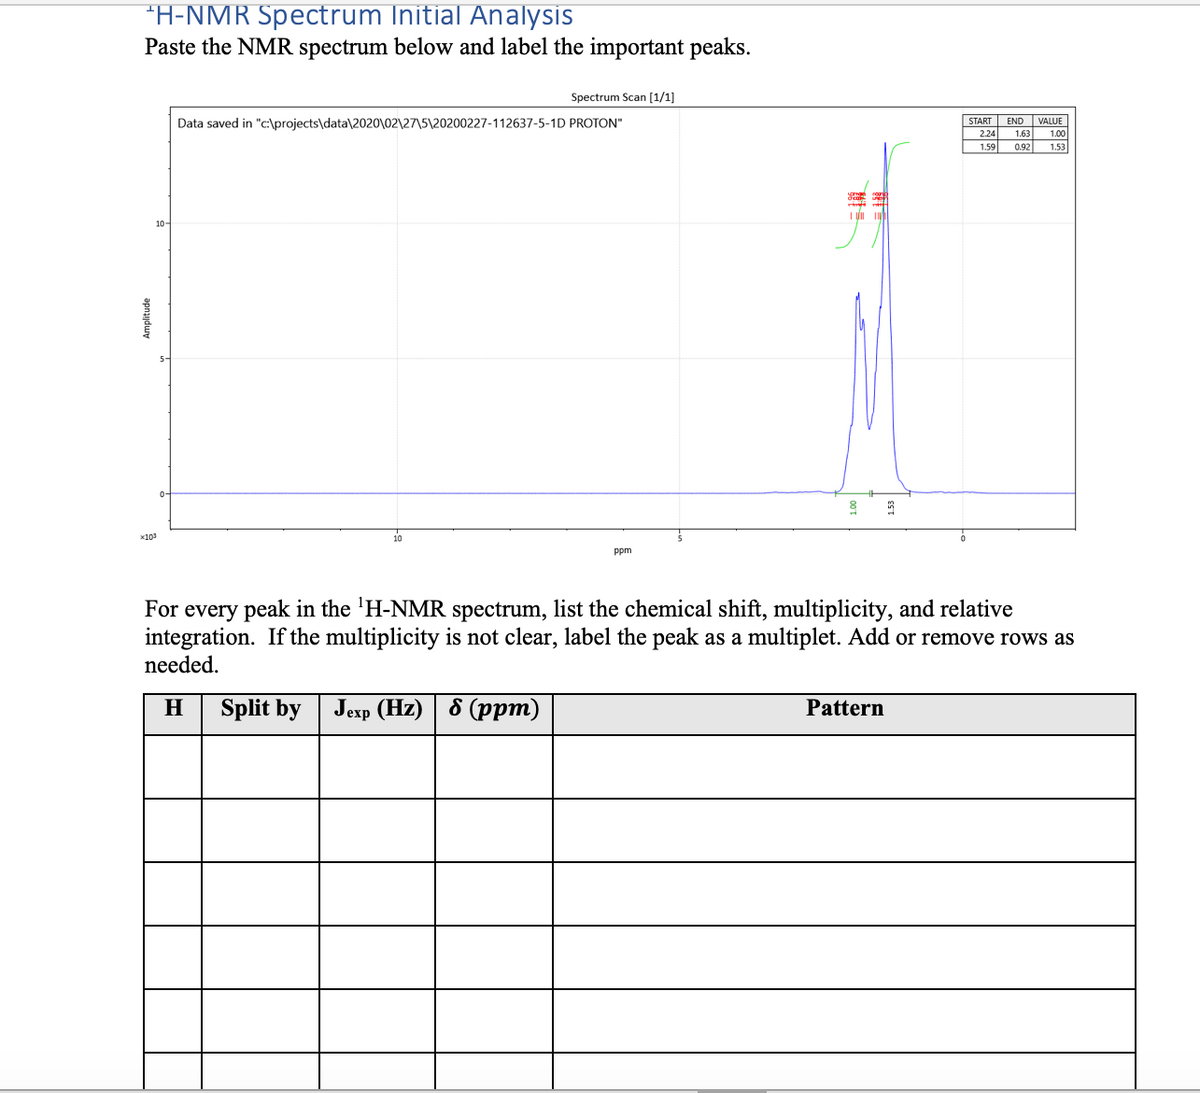 *H-NMR Spectrum Initial Analysis
Paste the NMR spectrum below and label the important peaks.
Spectrum Scan [1/1]
Data saved in "c:\projects\data\2020\02\27\5\20200227-112637-5-1D PROTON"
VALUE
START
END
2.24
1.63
1.00
1.59
0.92
1.53
10-
x103
10
ppm
For every peak in the 'H-NMR spectrum, list the chemical shift, multiplicity, and relative
integration. If the multiplicity is not clear, label the peak as a multiplet. Add or remove rows as
needed.
Split by Jexp (Hz) 6 (ppm)
Pattern
Amplitude
